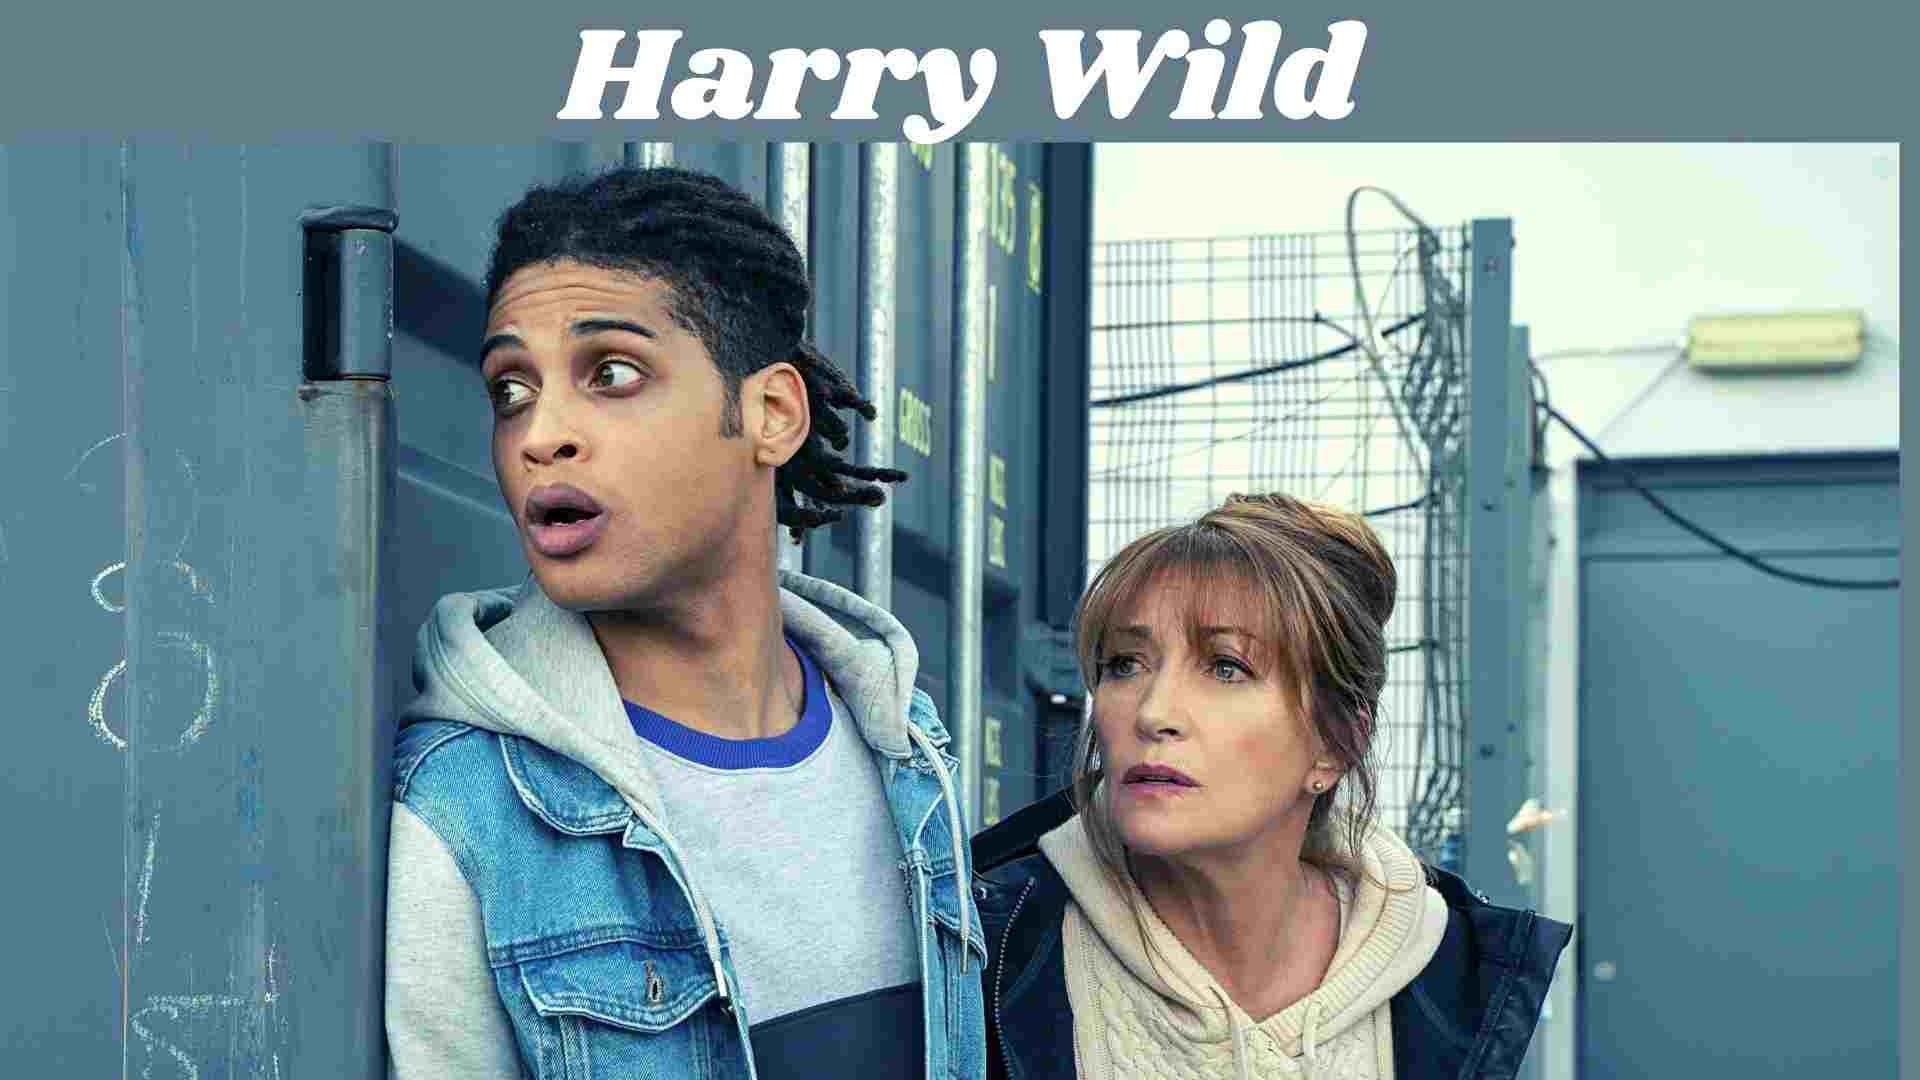 Harry Wild Parents guide and Age Rating | 2022